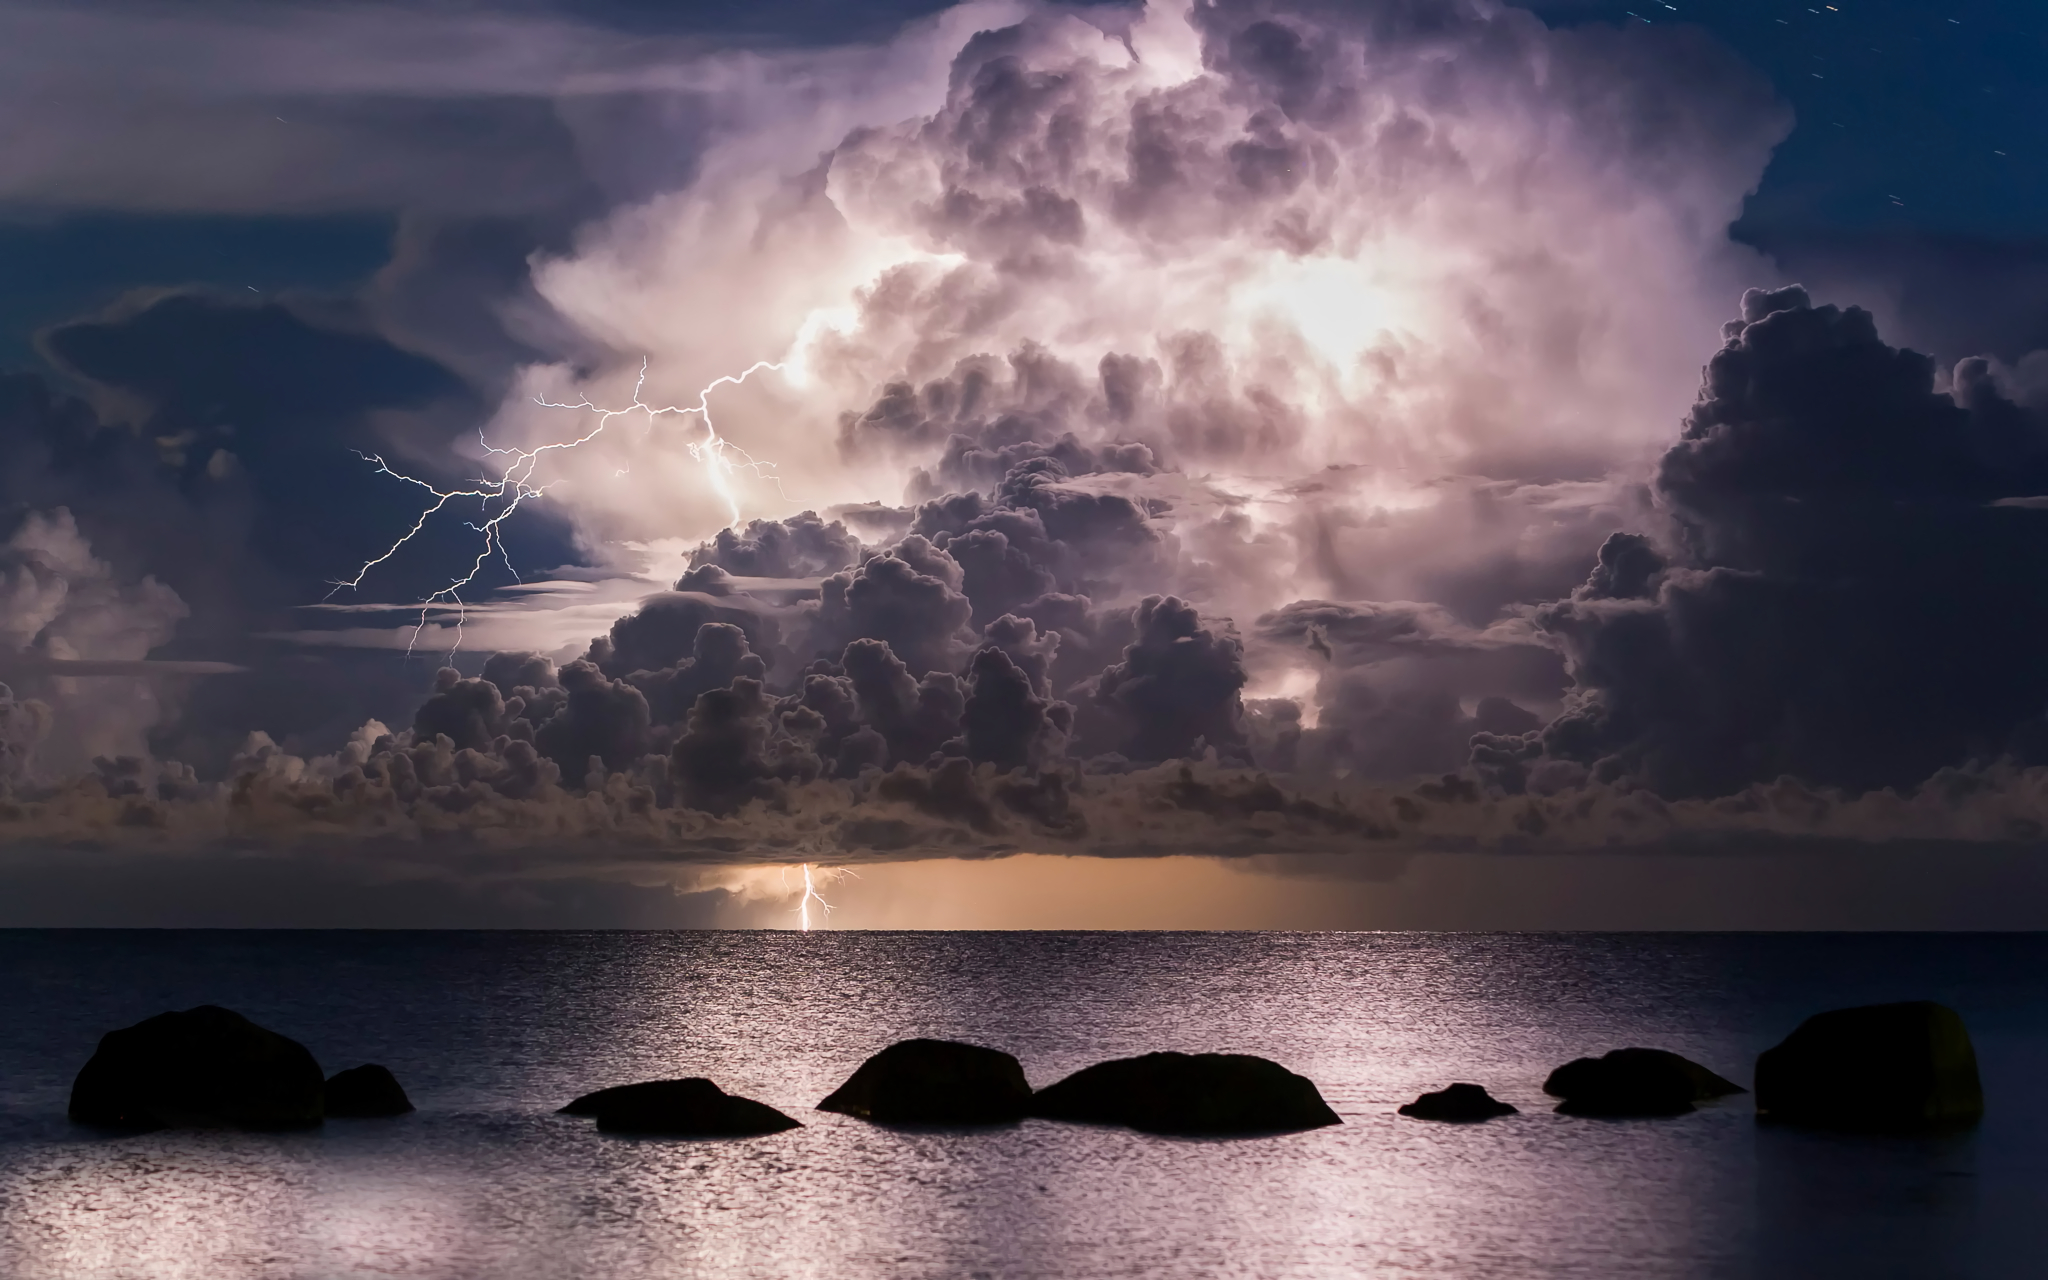 2048x1280 Lightning and Storm Clouds over Ocea